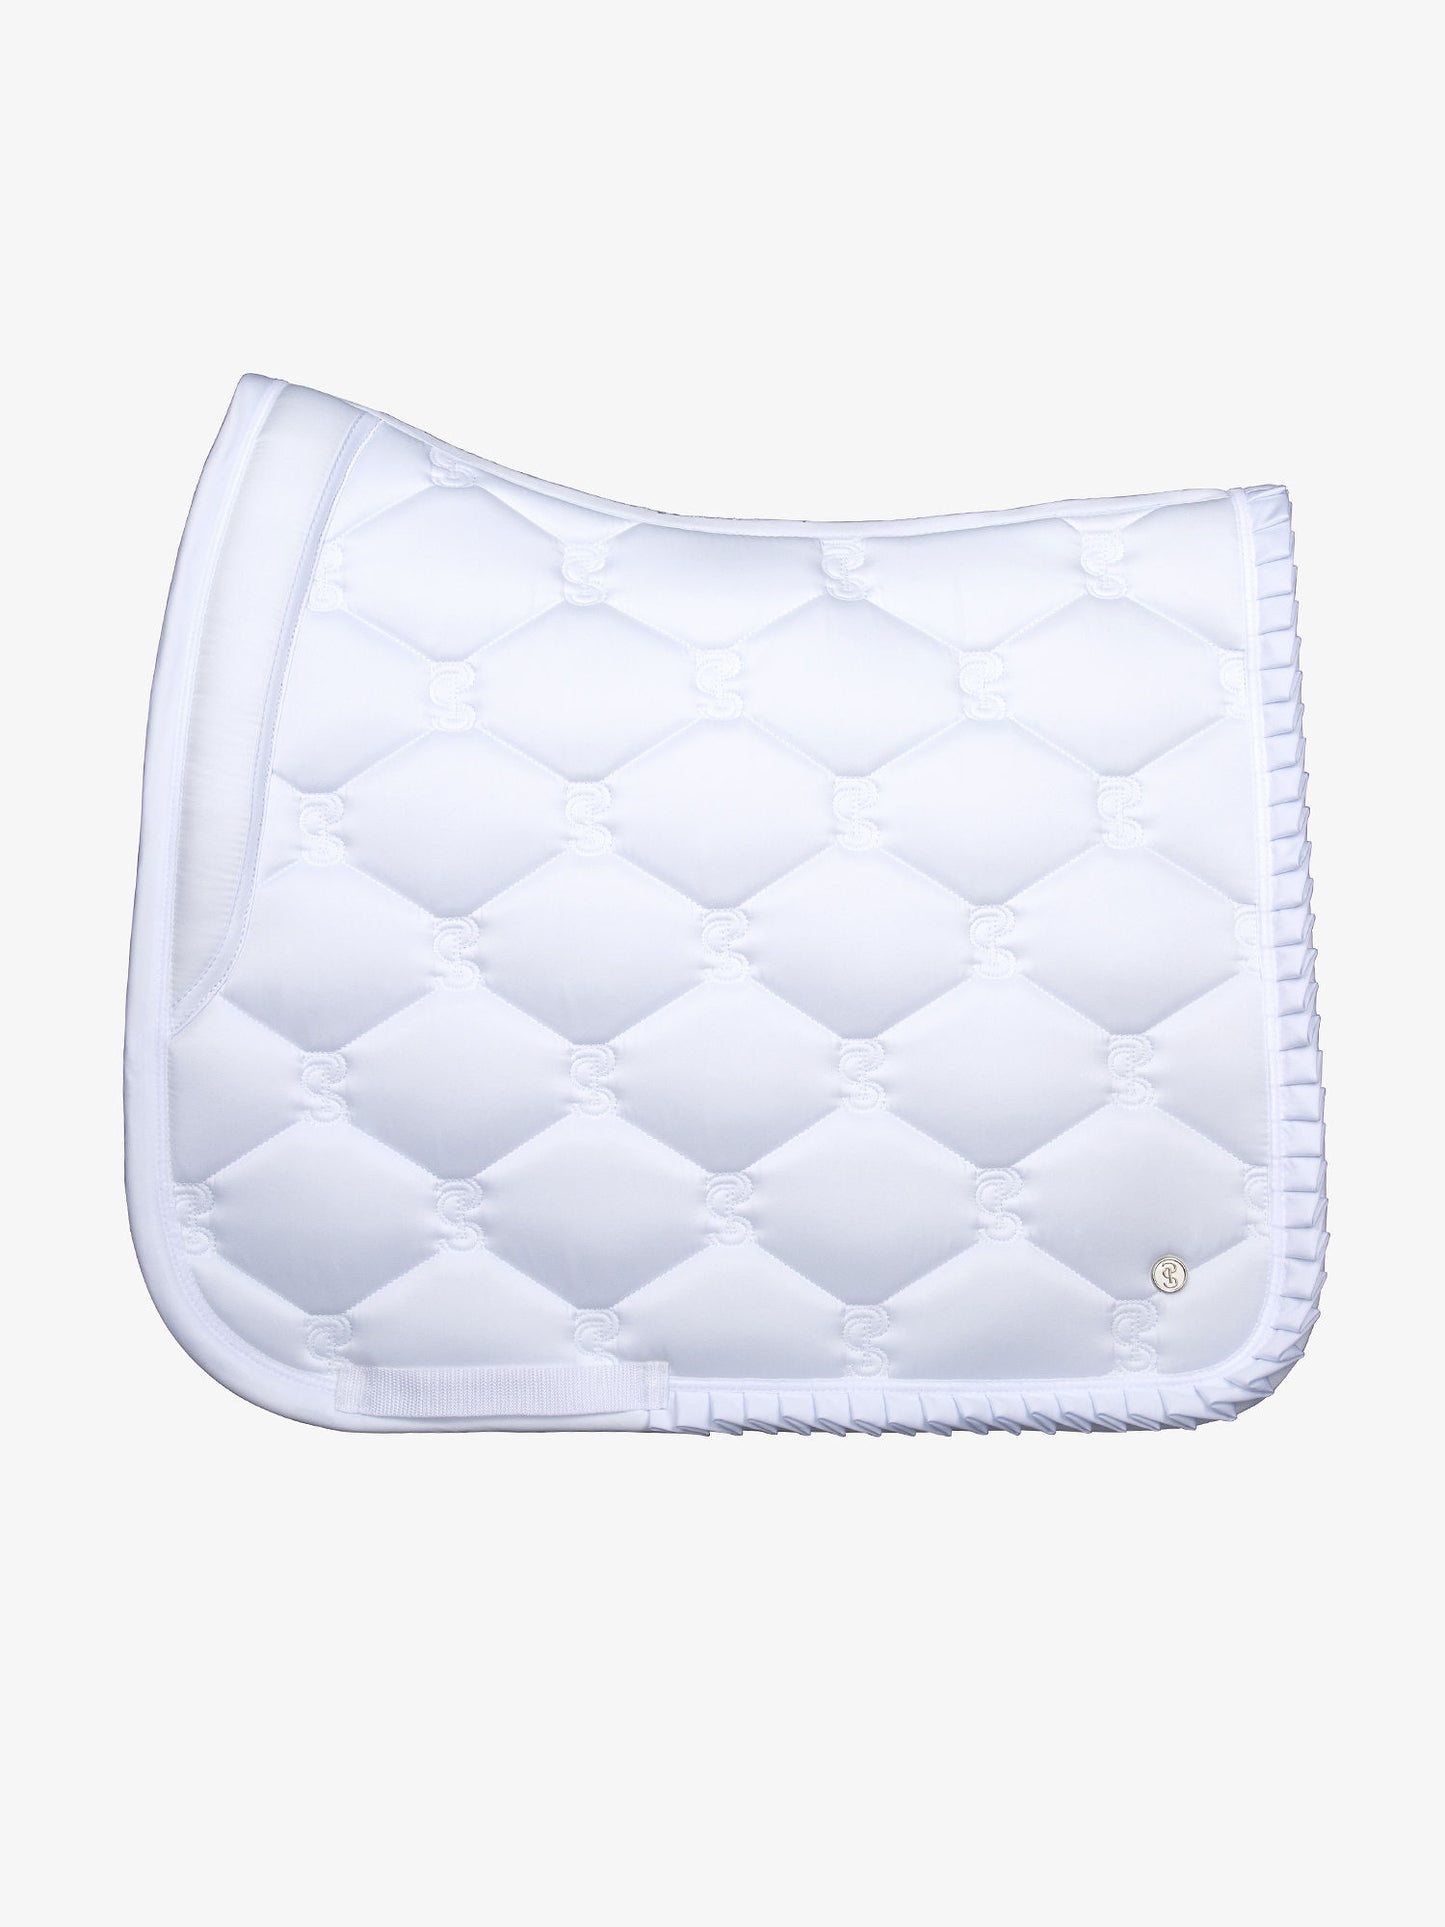 PS of Sweden -  Limited Edition Ruffle Dressage Set - White